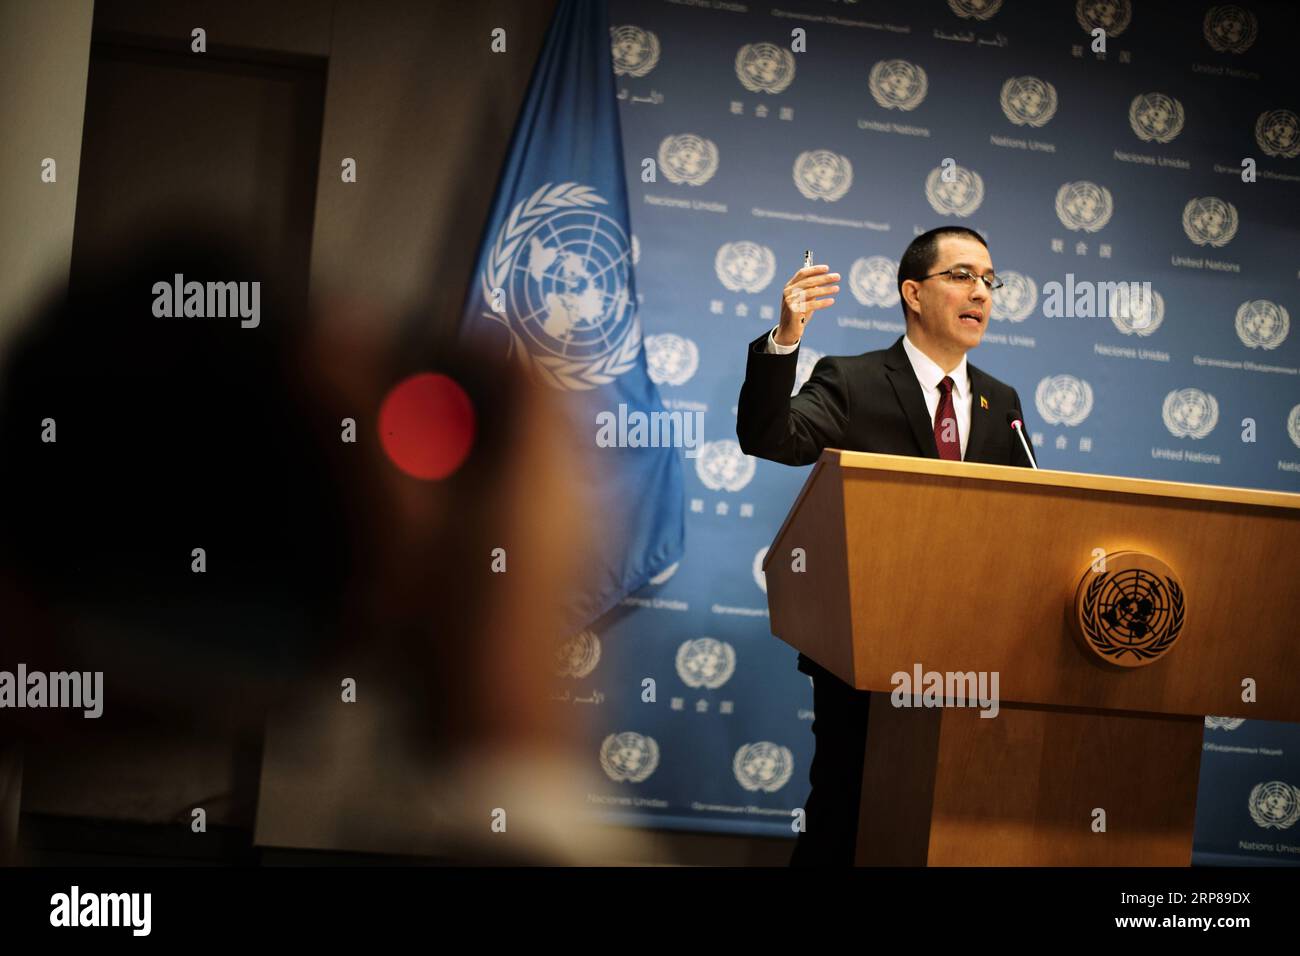 (190223) -- UNITED NATIONS, Feb. 23, 2019 (Xinhua) -- Venezuelan Foreign Minister Jorge Arreaza attends a press conference at the United Nations headquarters in New York, Feb. 22, 2019. Venezuelan Foreign Minister Jorge Arreaza said Friday that his government wants to have peace with the United States and hopes to sit down at the table with the opposition. (Xinhua/Li Muzi) UN-VENEZUELA-FM-JORGE ARREAZA-RESS CONFERENCE PUBLICATIONxNOTxINxCHN Stock Photo